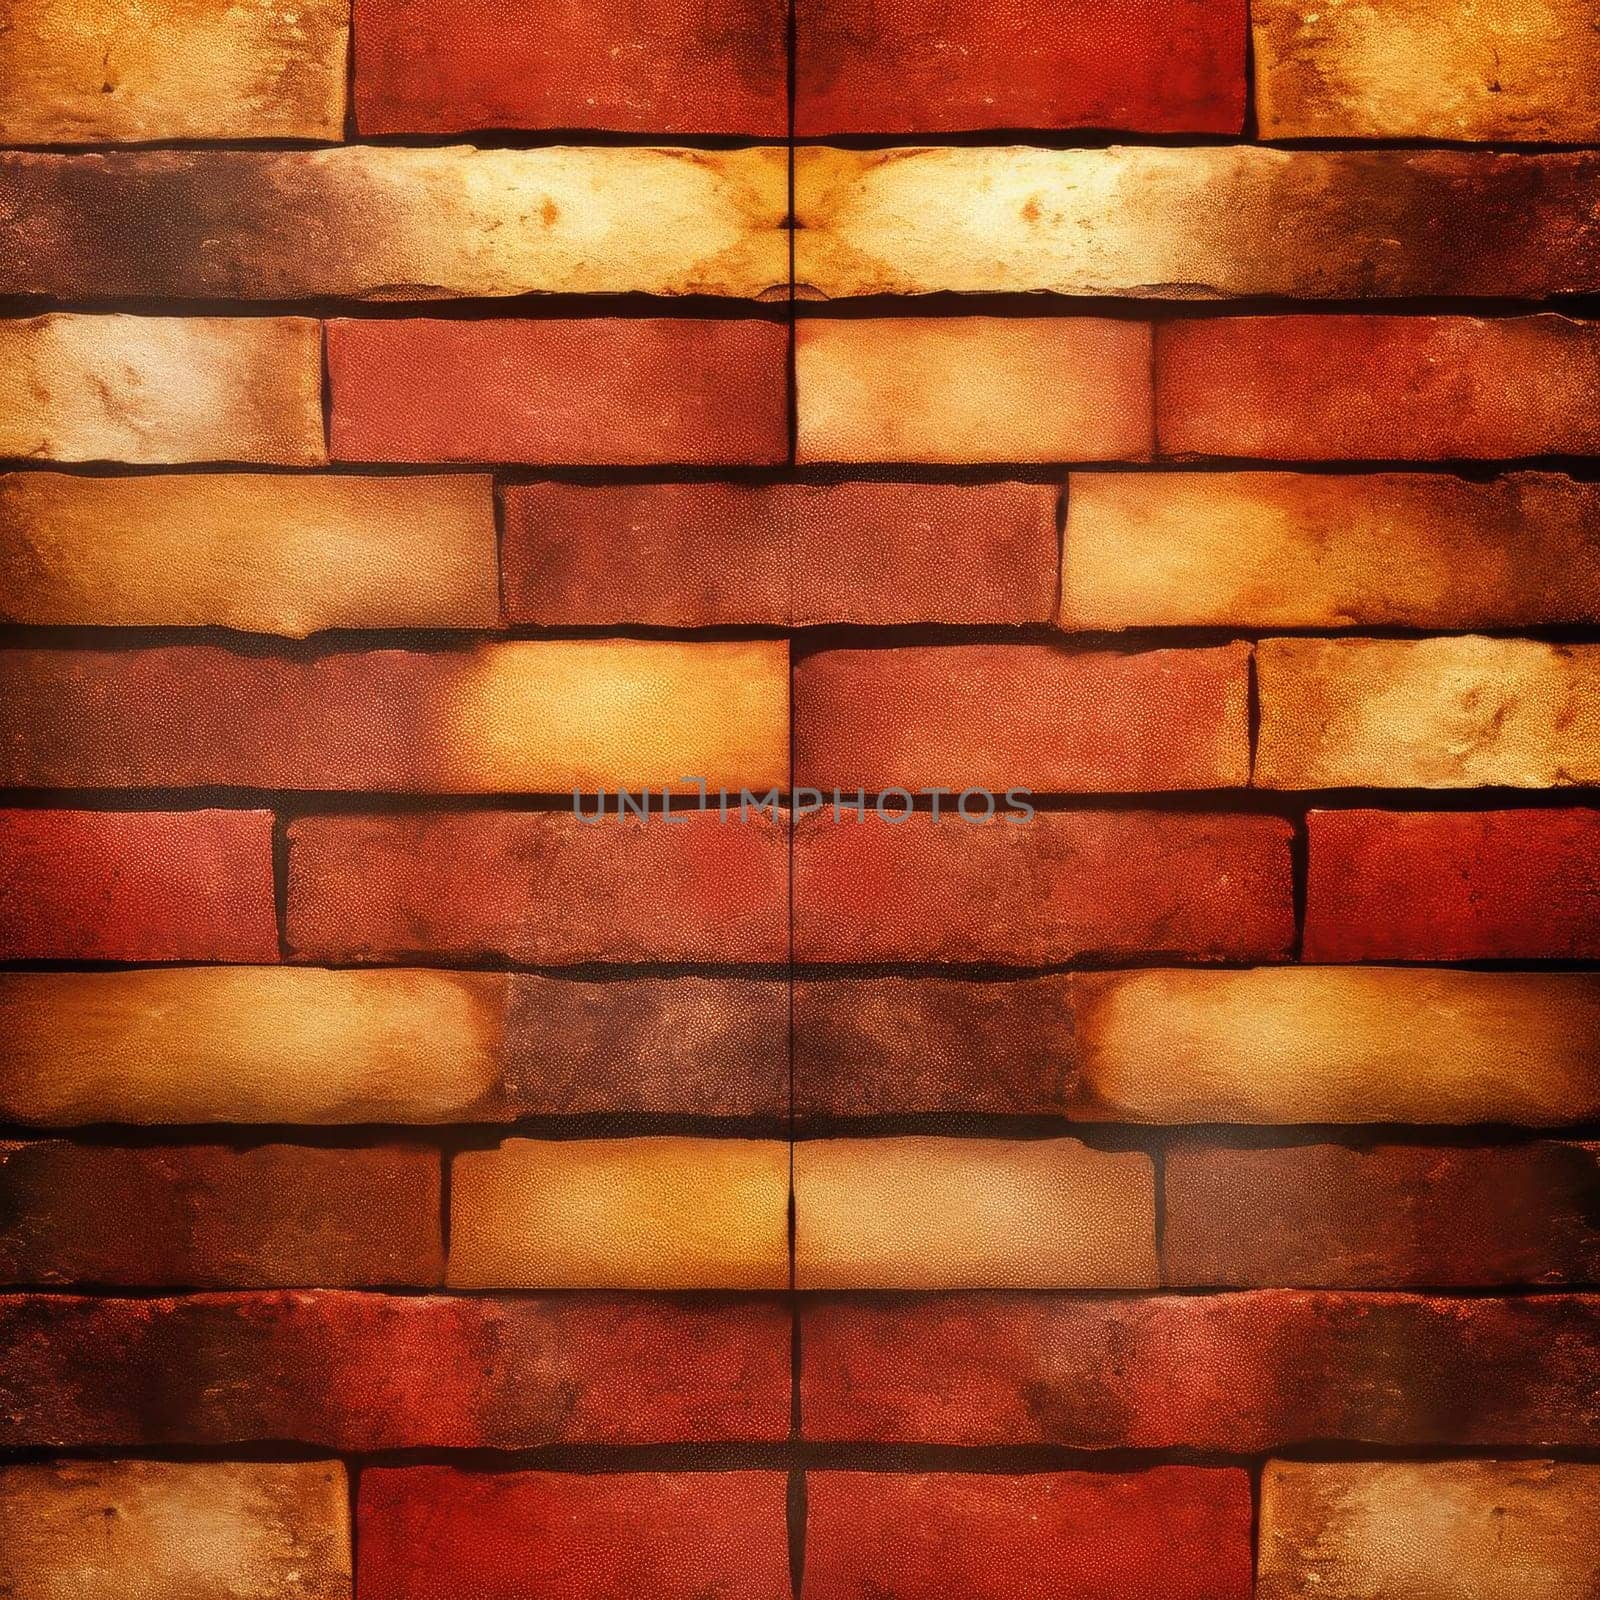 Colorful brick wall texture background - red, orange, yellow, brown colors by eduardobellotto